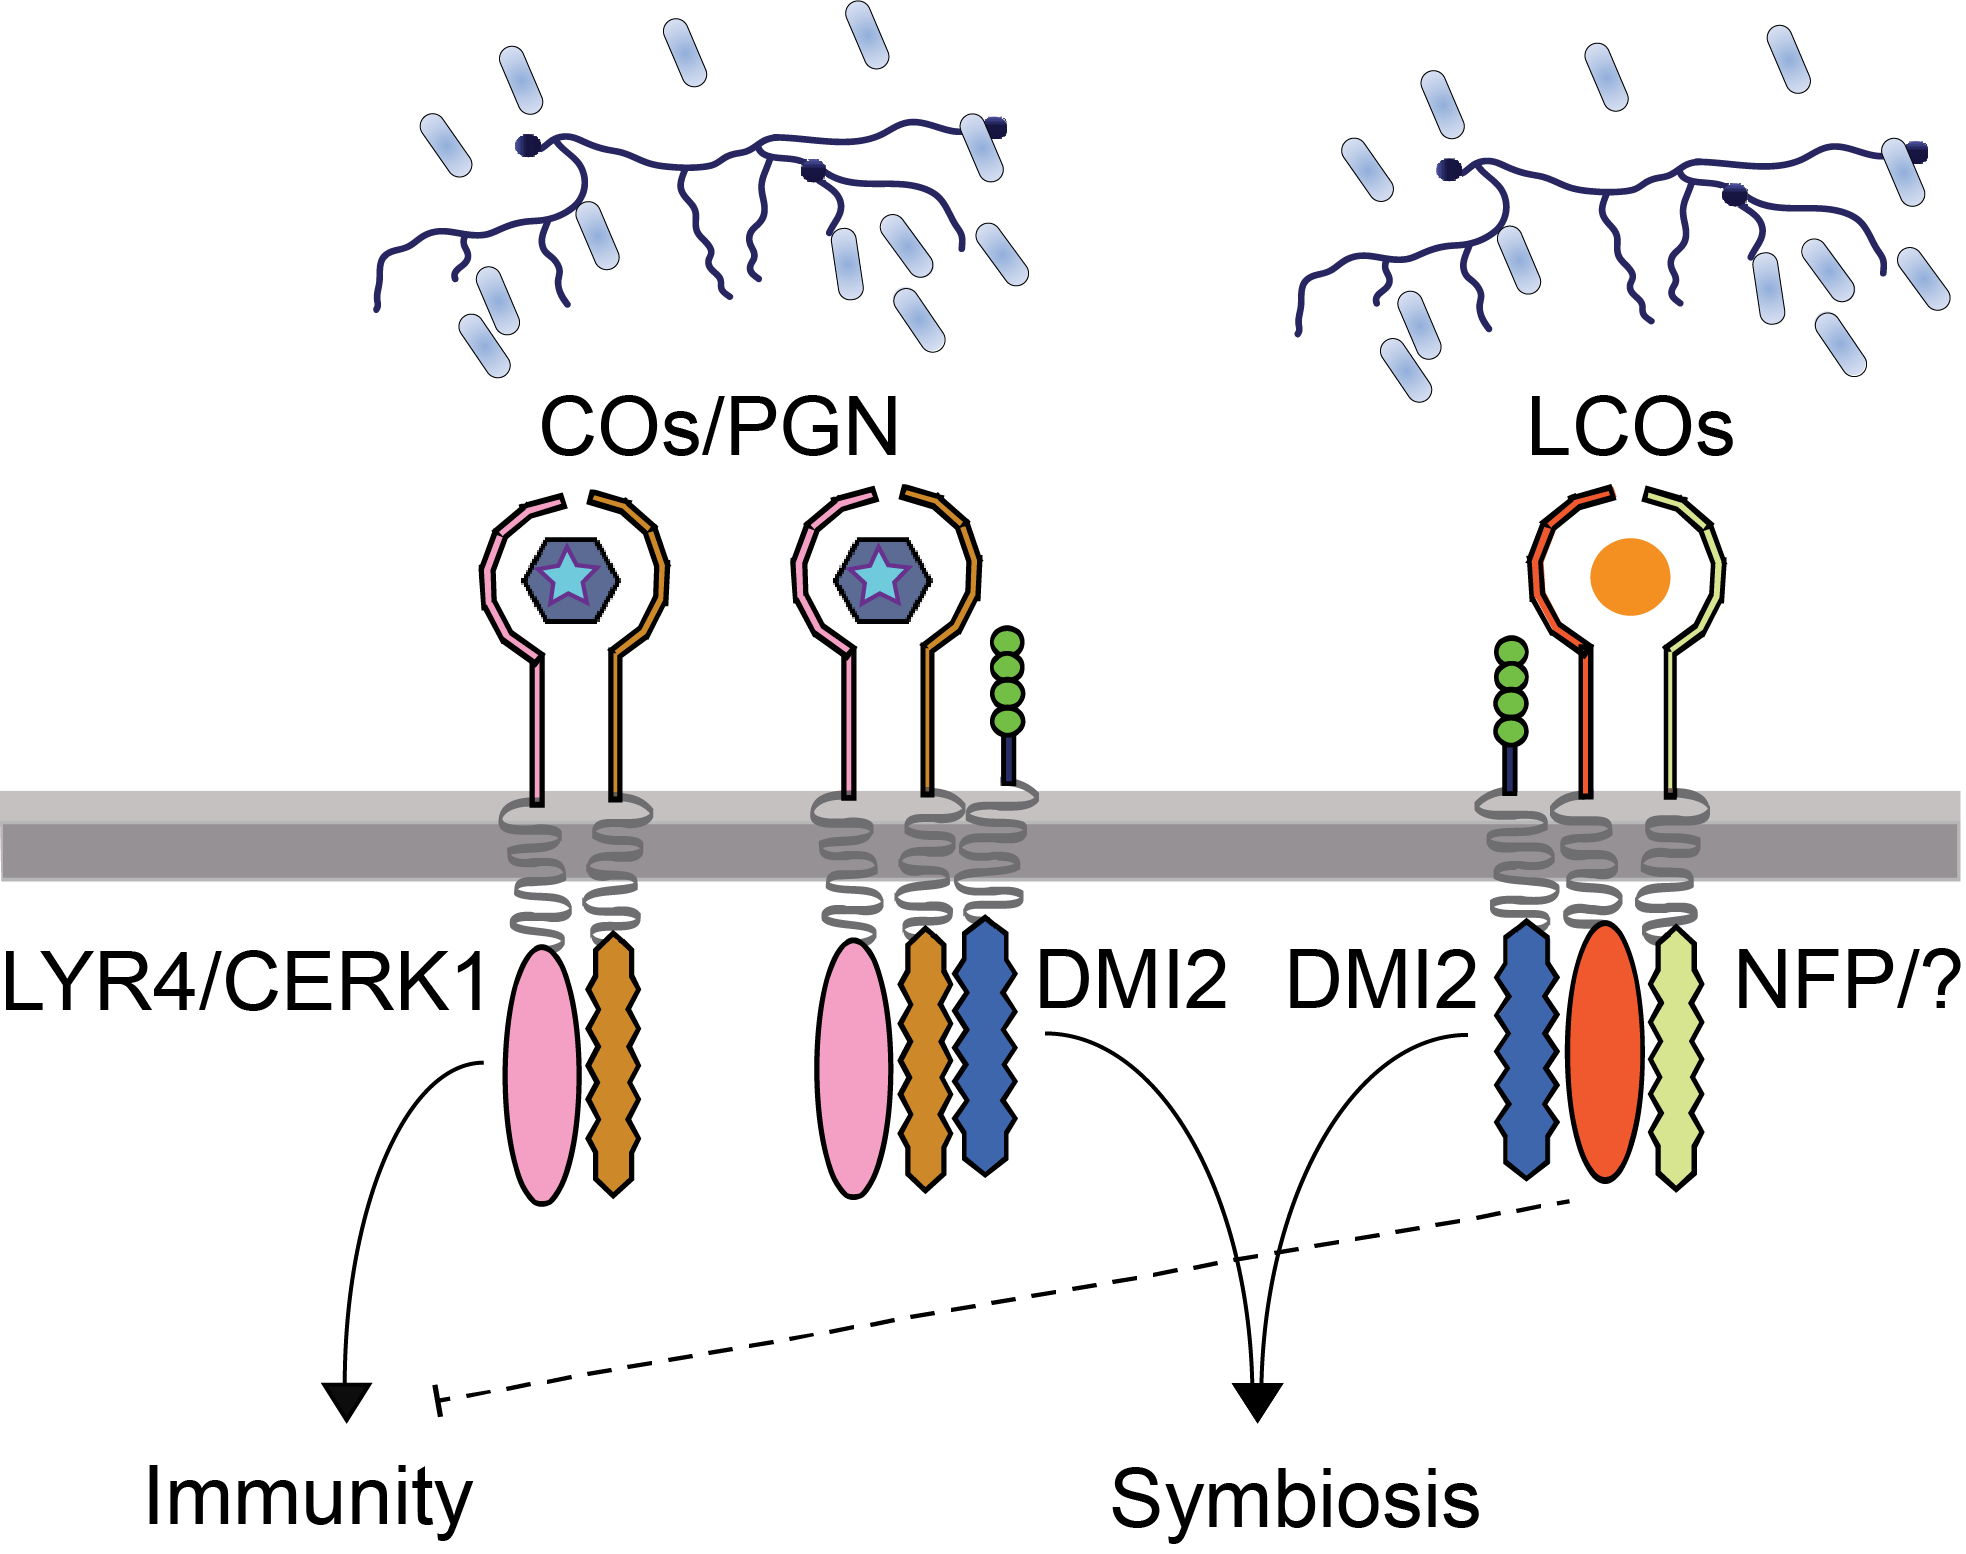 A model for COs/PGN and LCO recognition during symbiosis. Graphic by Feng Feng.